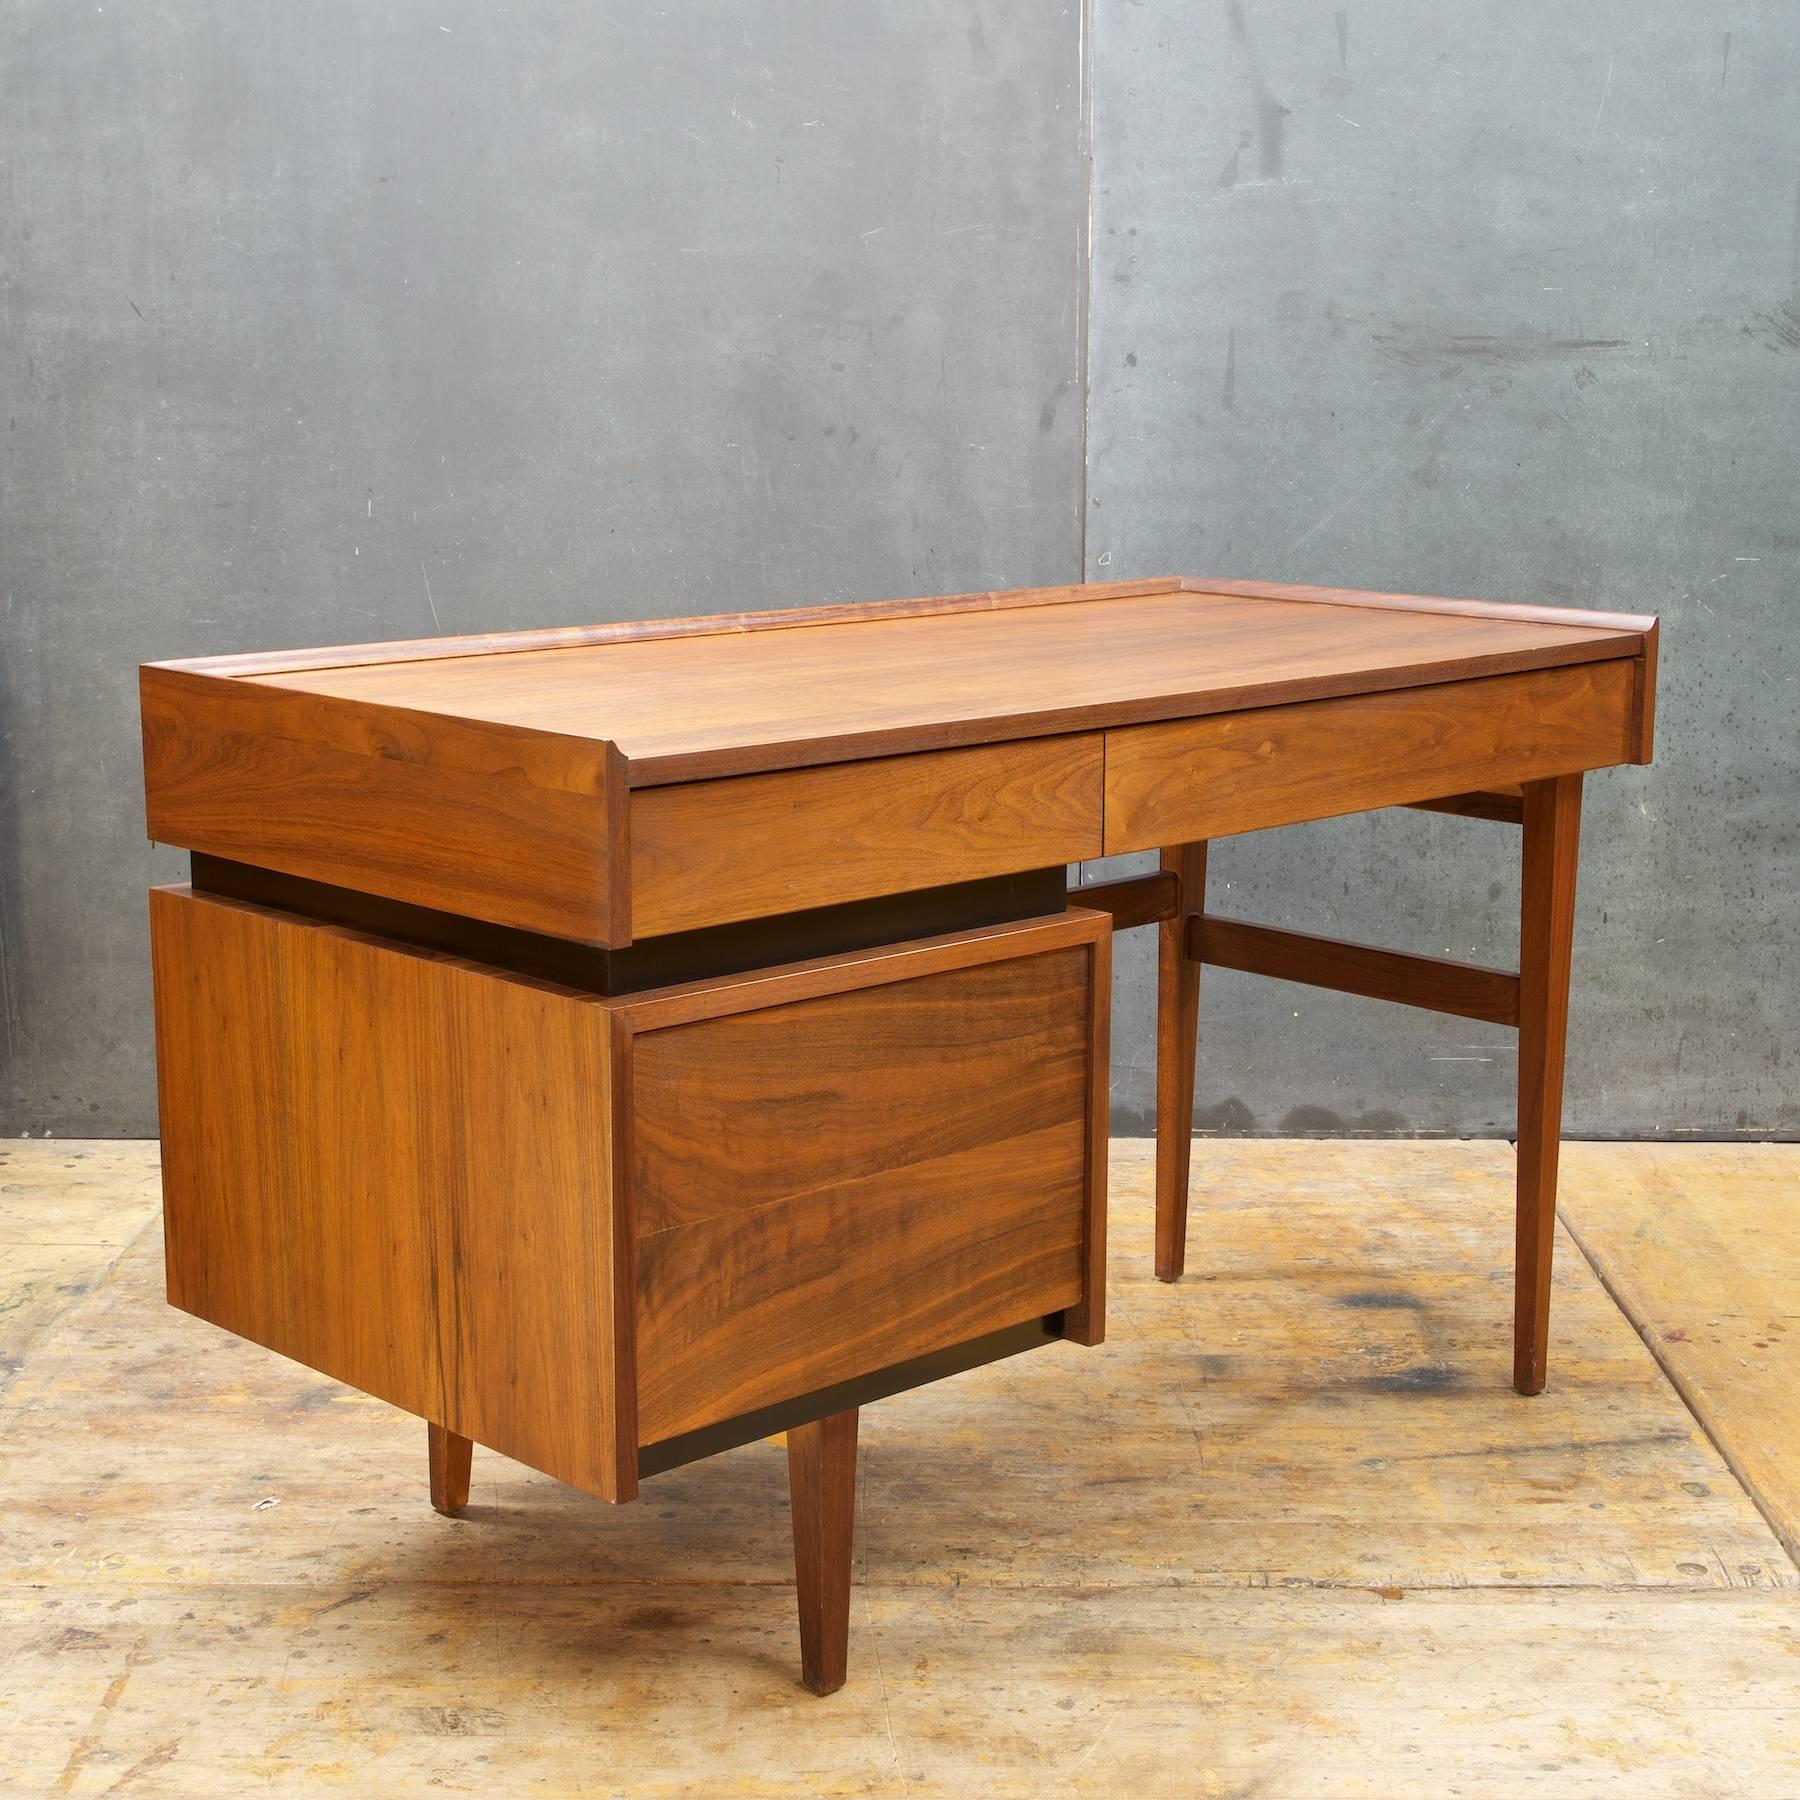 Rare and made in the USA, Classic American Modern oiled walnut desk designed by Milo Baughman for Dillingham. Beautiful grained oiled walnut finish, superior quality. Features two drawers over generous size file drawer. Finished walnut on all sides,